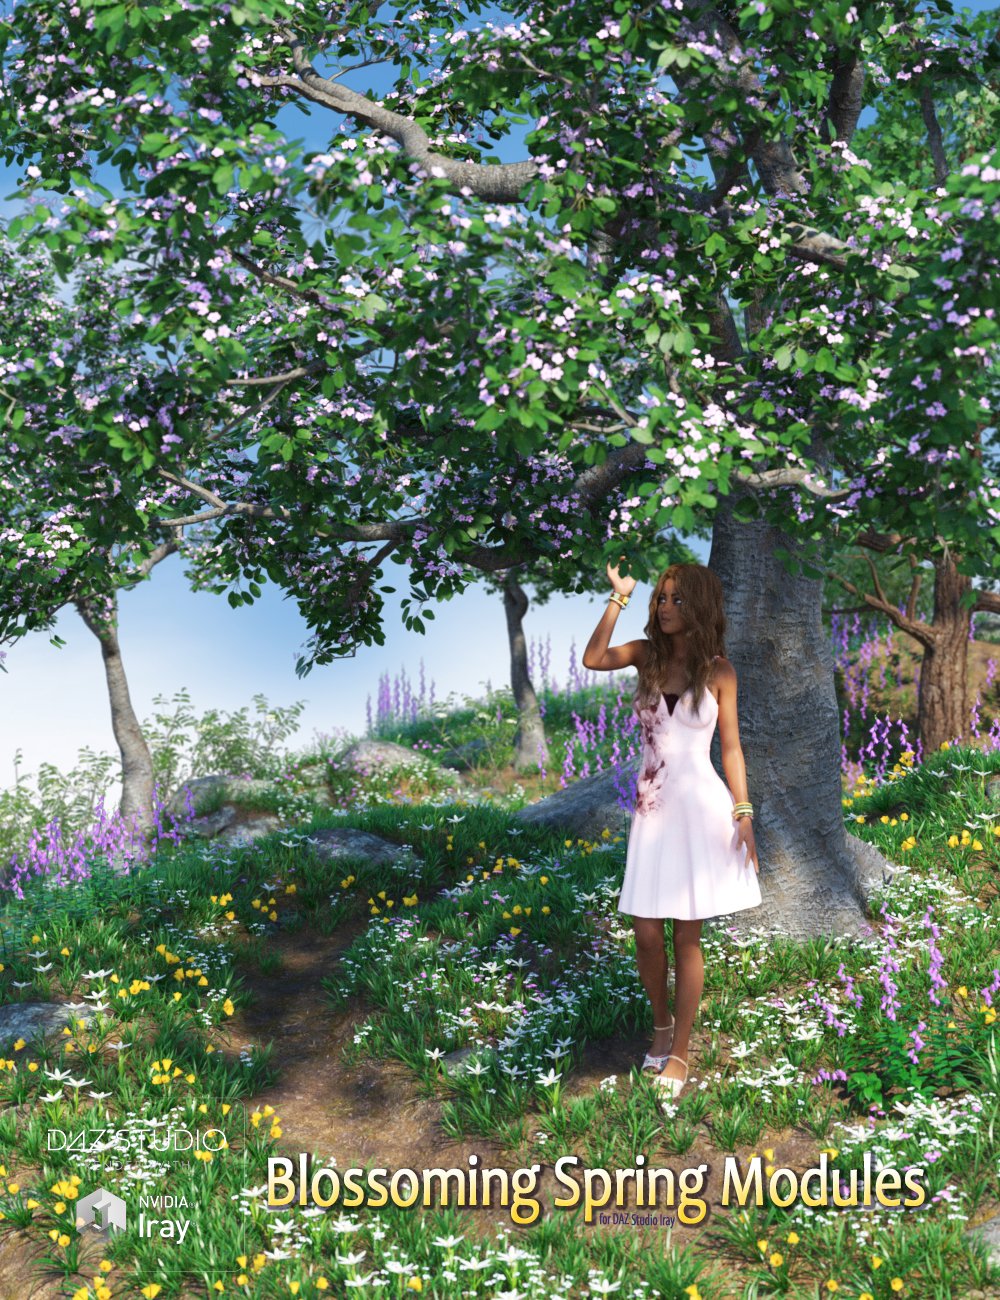 Blossoming Spring Modules by: Peanterra, 3D Models by Daz 3D